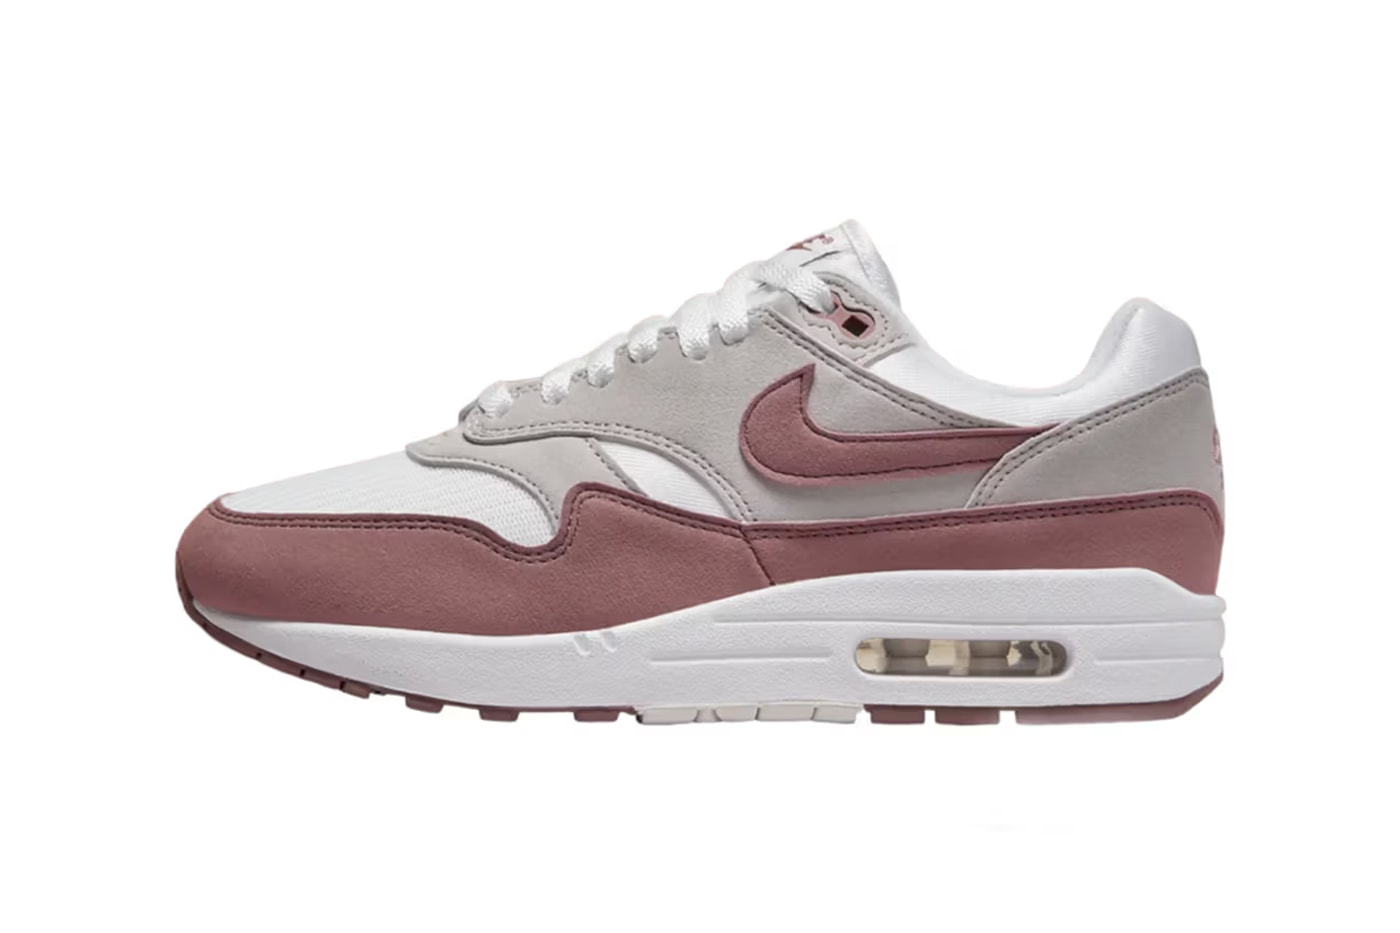 Nike Air Max 1 Smokey Mauve release info launch price womens sizing shoe sneaker model fall color colorway palette suede details